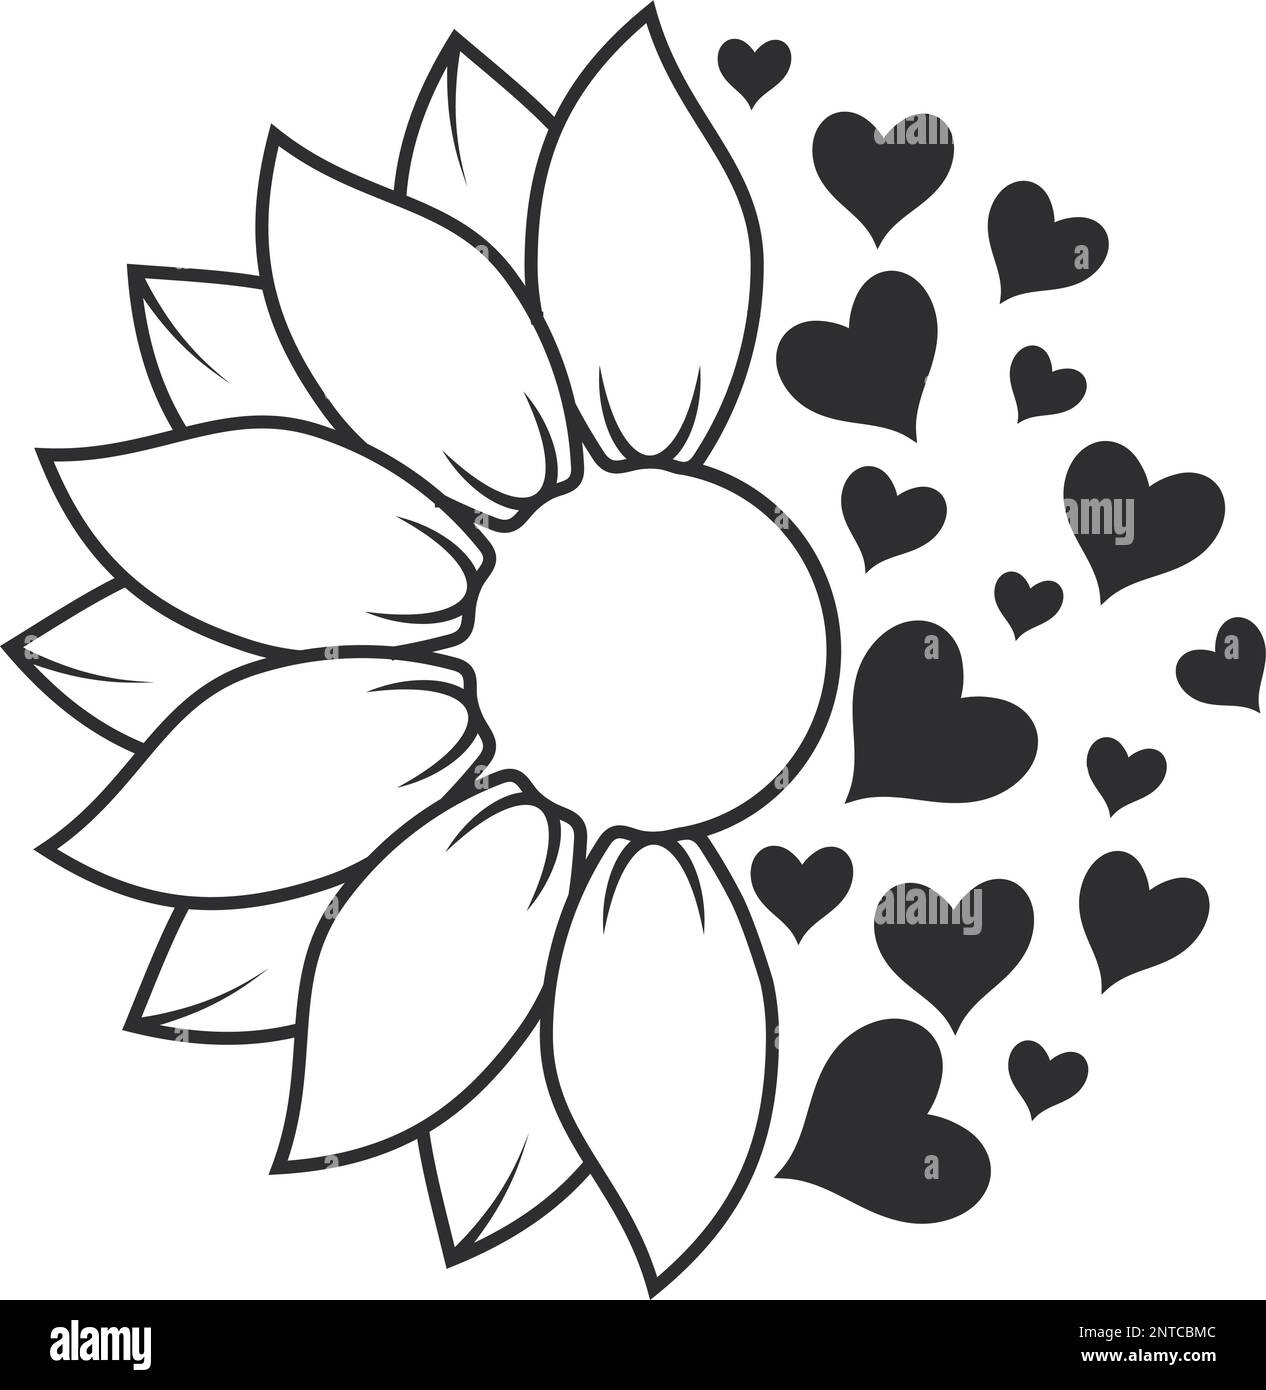 3,766 Sunflower outline Vector Images | Depositphotos